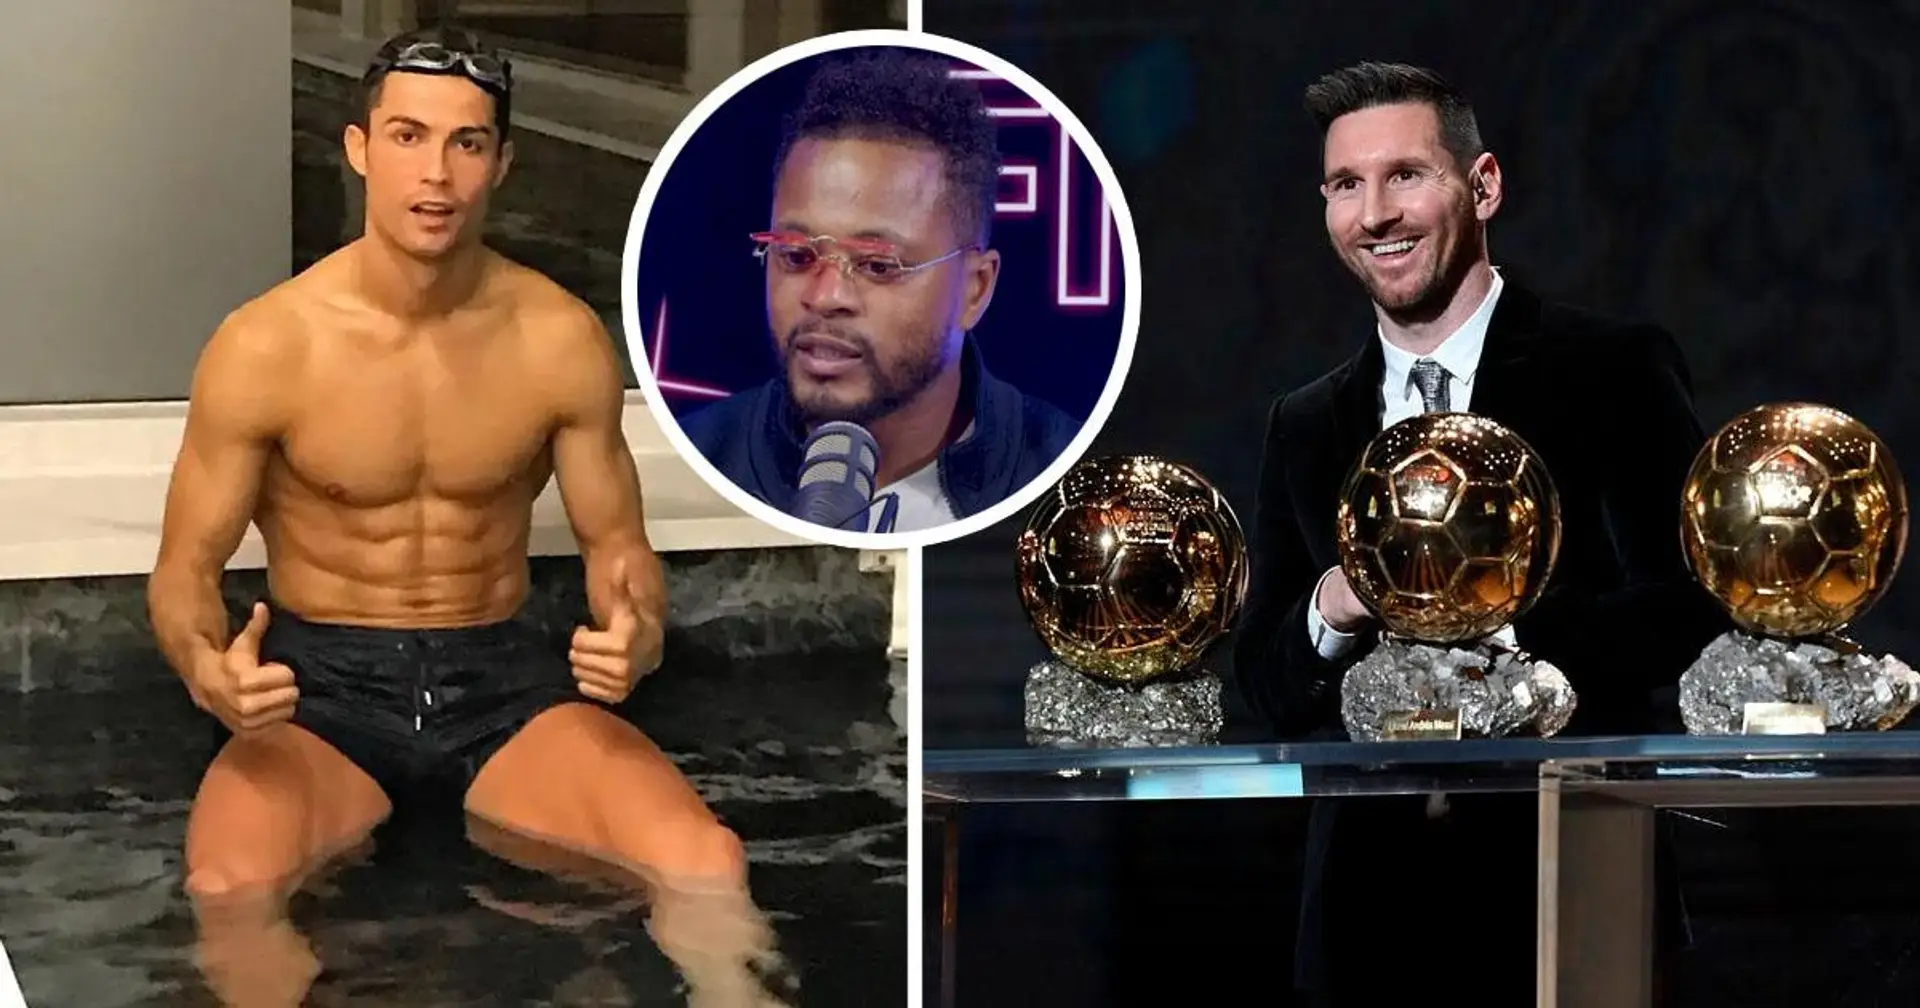 'He would have won 15 Ballon d'Or awards': Patrice Evra names Cristiano Ronaldo's qualities Messi will never have